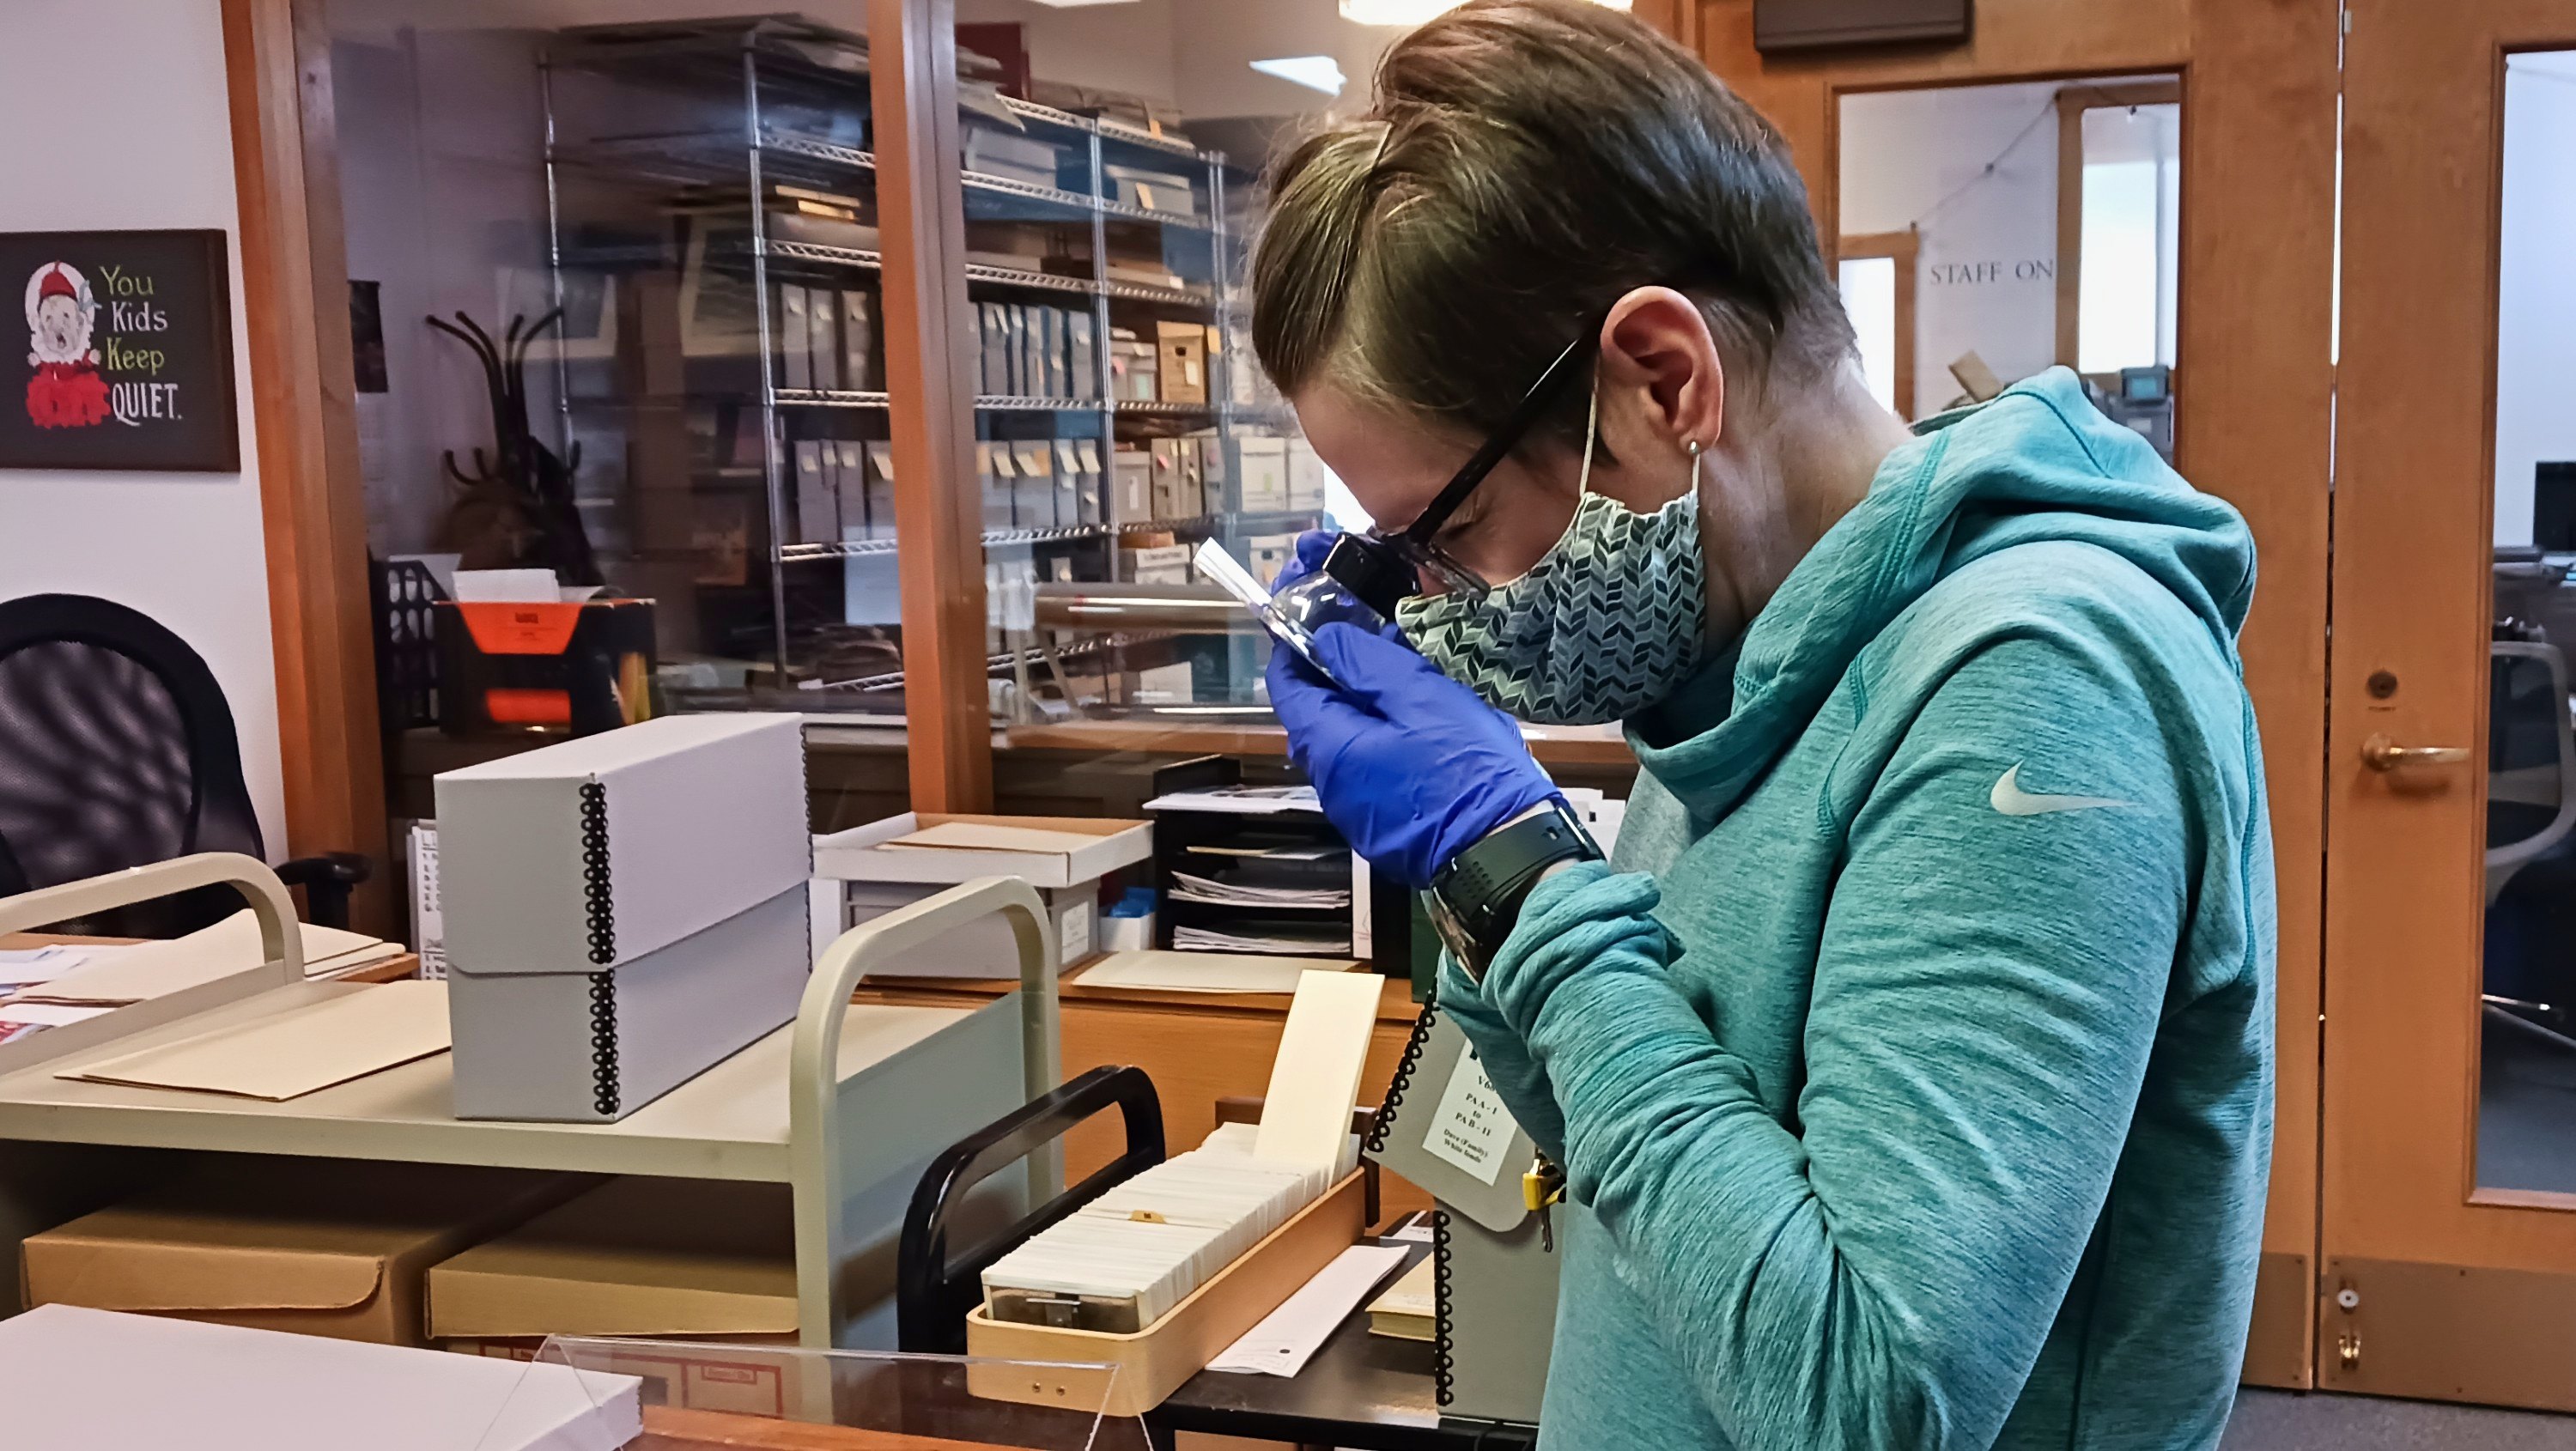 Grad student Lyndsay Conrad examines rare ski images at the archives of the Whyte Museum of the Canadian Rockies in Banff. (Photo: PearlAnn Reichwein)